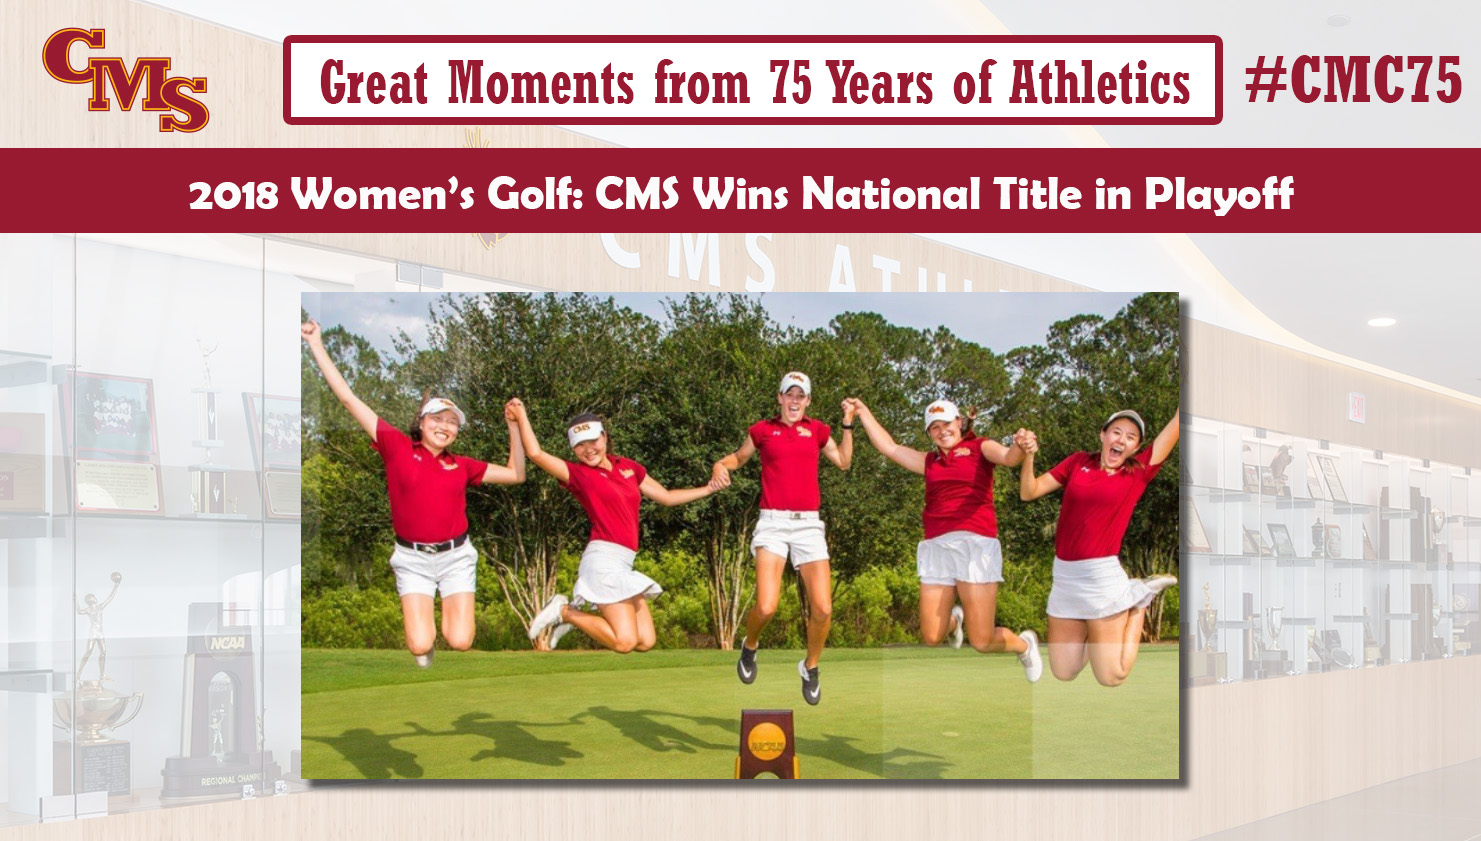 CMS celebrates the national title. Words over the photo read: Great Moments from 75 Years of Athletics, 2018 Women's Golf: CMS Wins National Title in Playoff